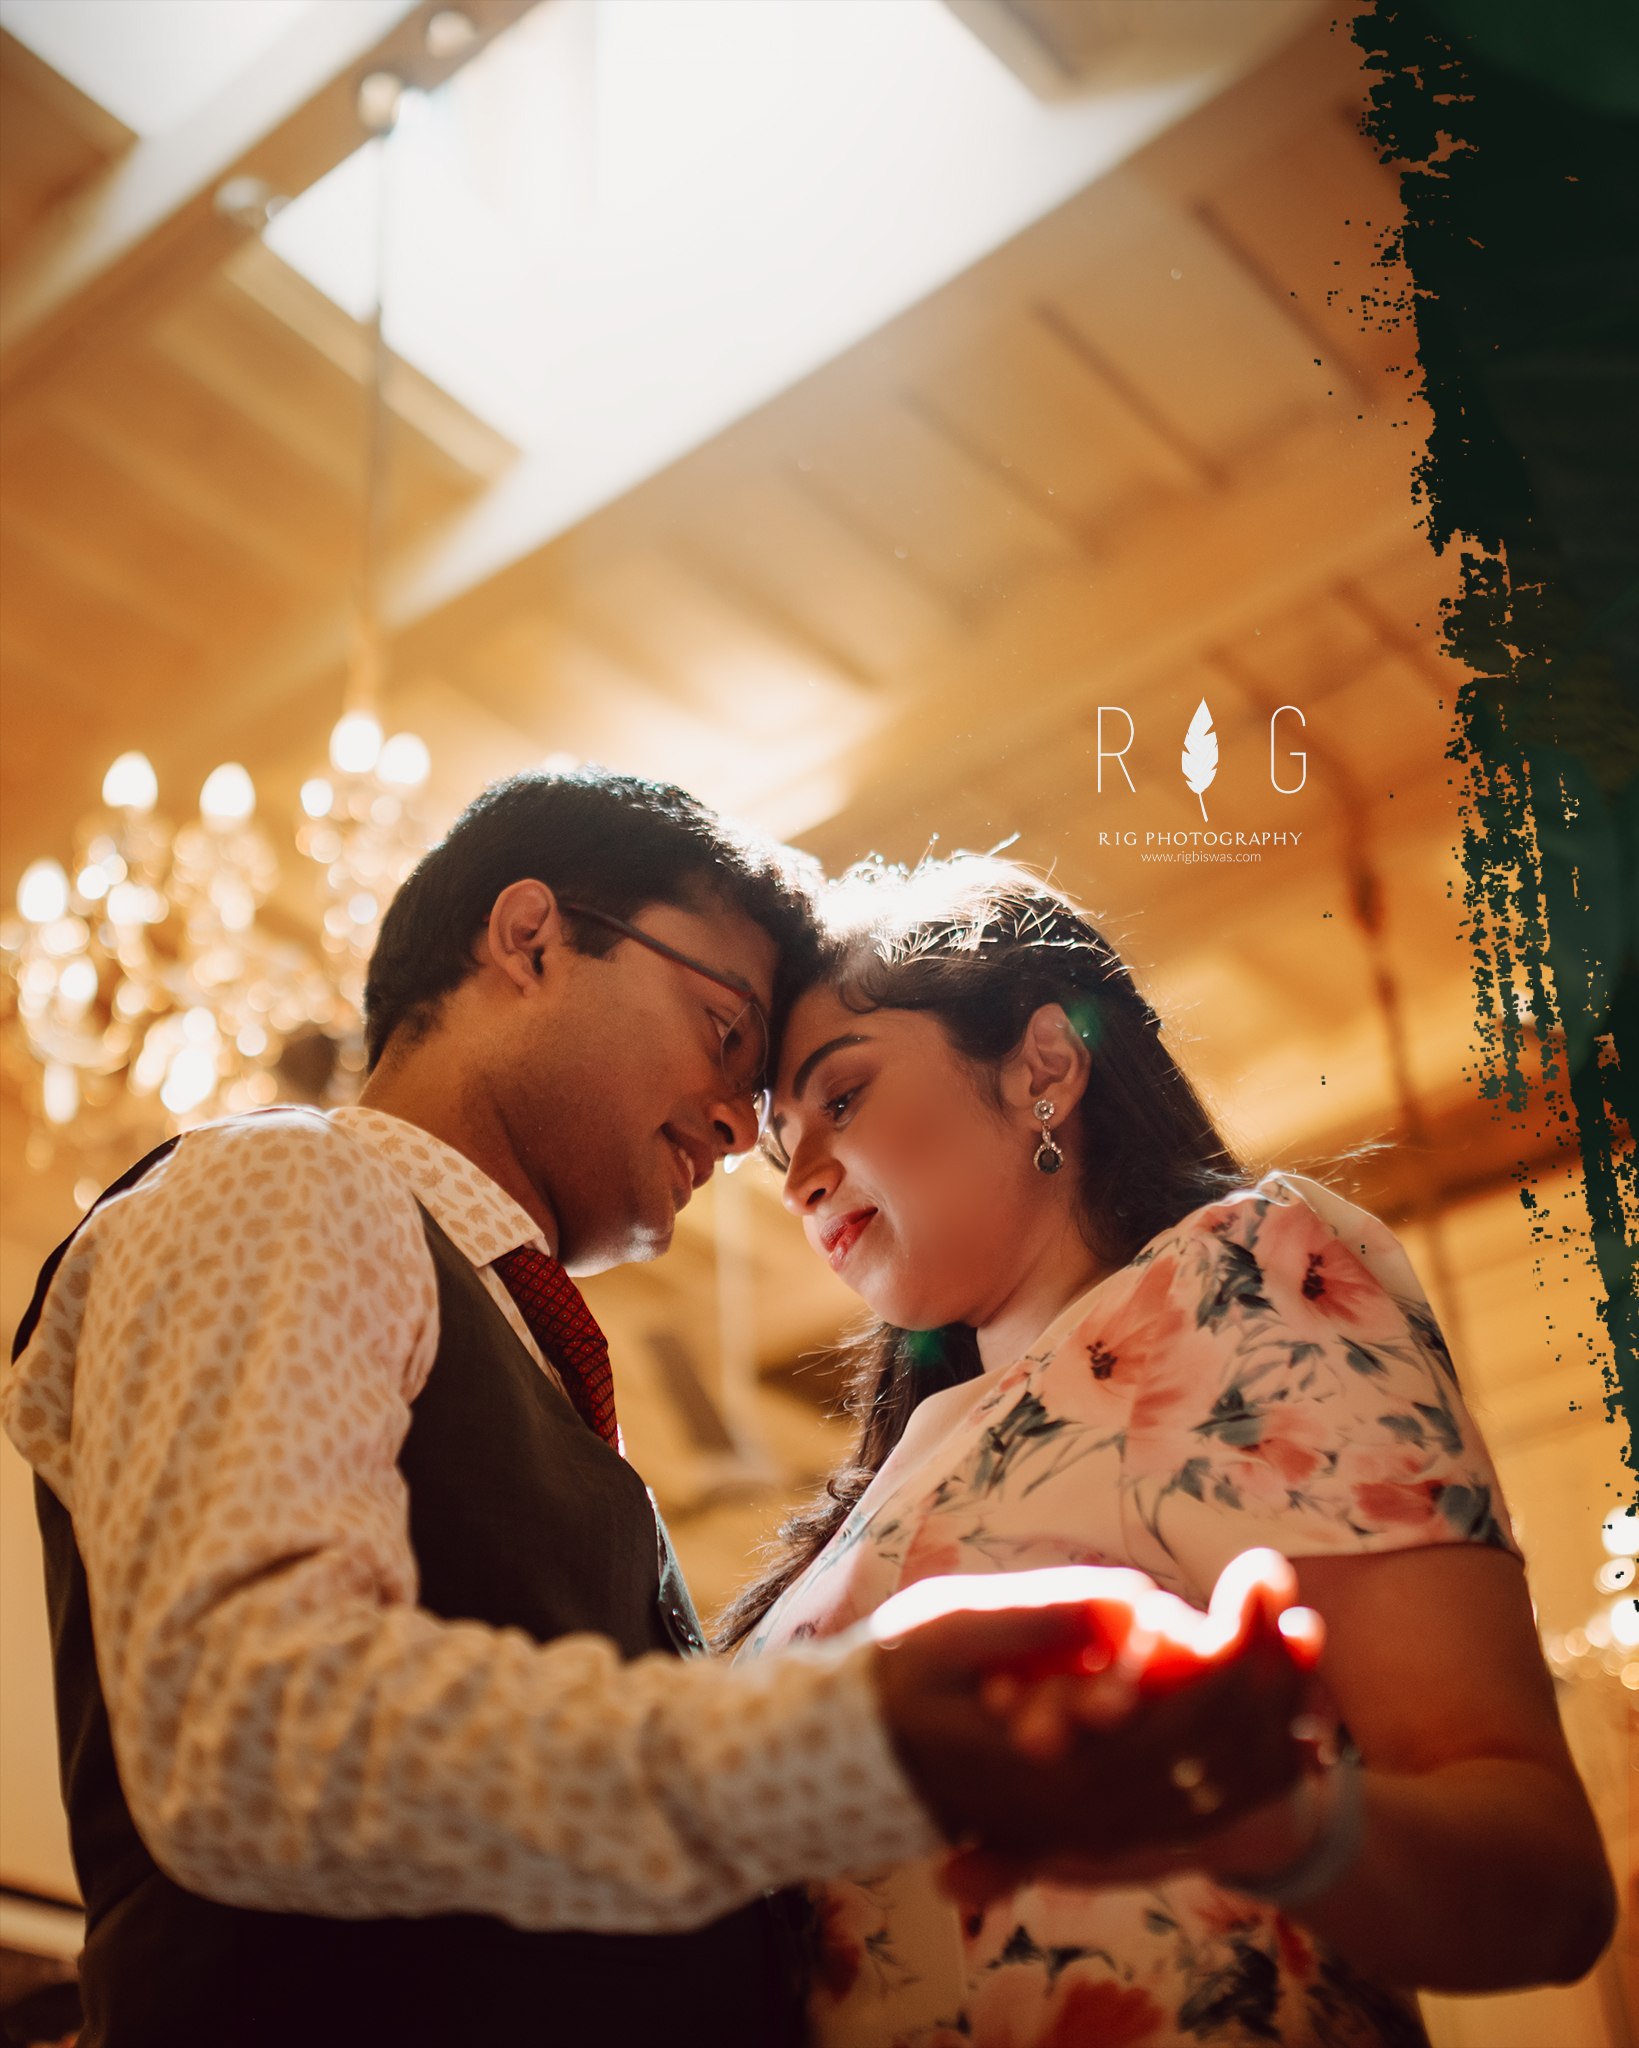 60 Creative Wedding Photography Poses to Try